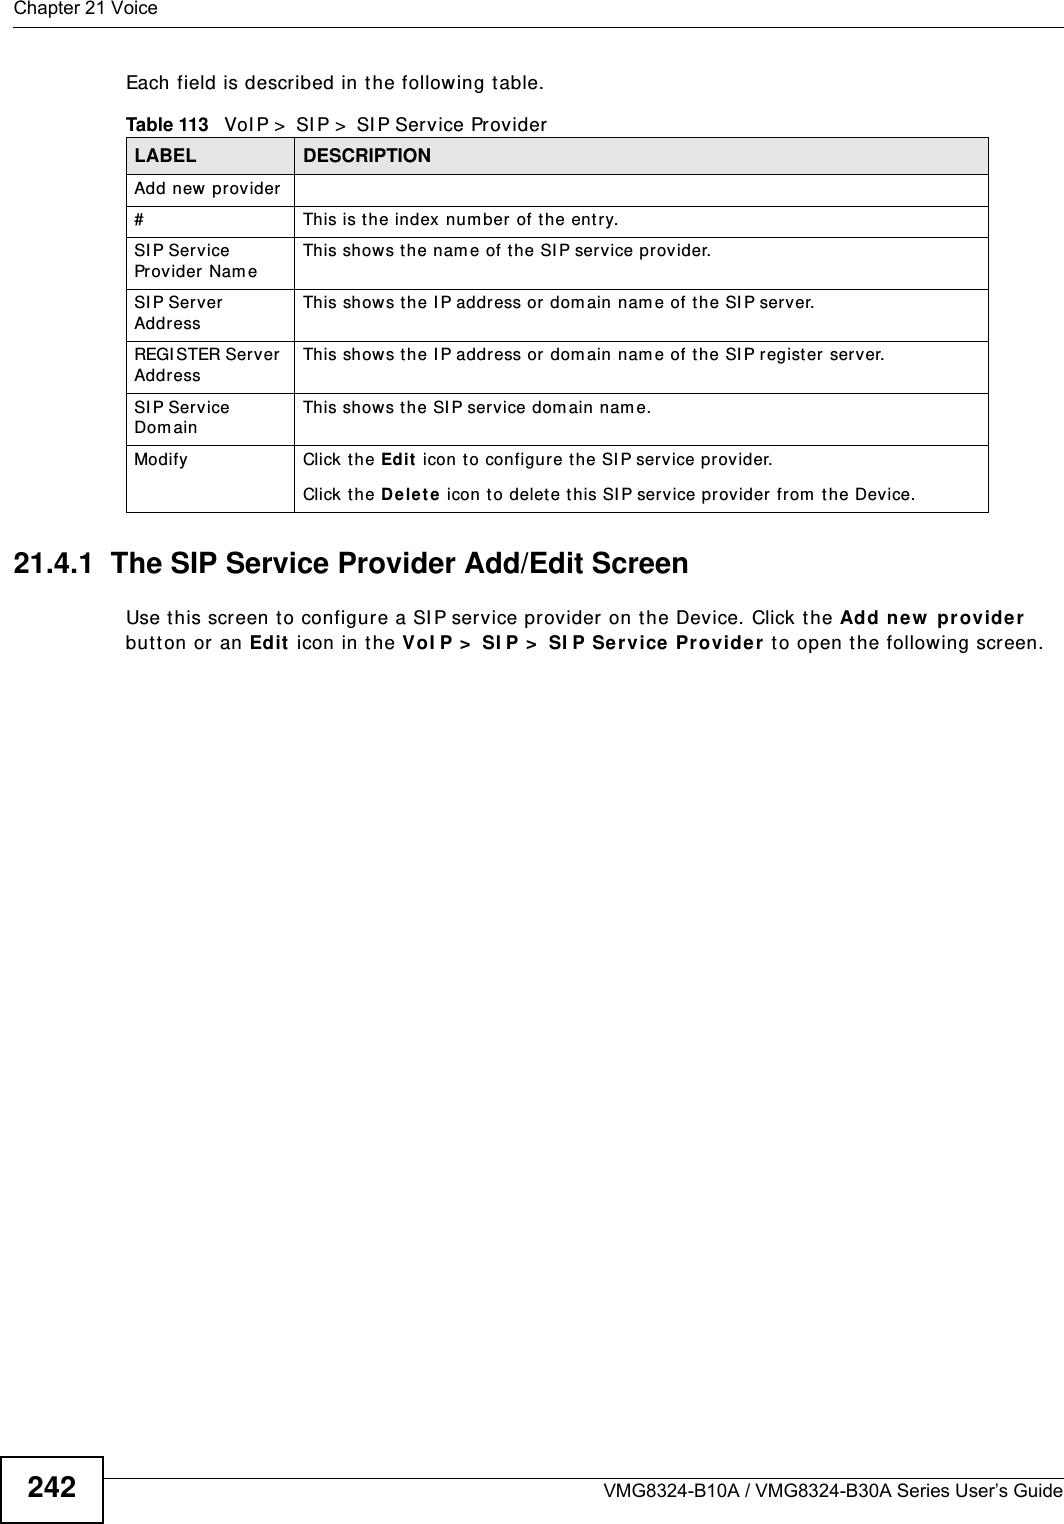 Chapter 21 VoiceVMG8324-B10A / VMG8324-B30A Series User’s Guide242Each field is described in t he following table.21.4.1  The SIP Service Provider Add/Edit Screen Use t his screen t o configure a SI P service provider on t he Device. Click t he Add ne w  pr ovider  but t on or an Edit  icon in t he V oI P &gt;  SI P &gt;  SI P Ser vice Provider  t o open the following screen. Table 113   VoI P &gt;  SI P &gt;  SI P Service ProviderLABEL DESCRIPTIONAdd new provider# This is t he index number  of t he entry.SI P Service Provider Nam e This show s t he nam e of the SI P service provider.SI P Server AddressThis show s t he I P address or dom ain nam e of the SI P server.REGI STER Server  AddressThis shows t he I P address or dom ain nam e of the SI P register server.SI P Service Dom ainThis show s t he SI P service dom ain nam e.Modify Click the Edit  icon t o configure the SI P service provider.Click t he D e let e icon t o delet e this SI P service pr ovider from  t he Device. 